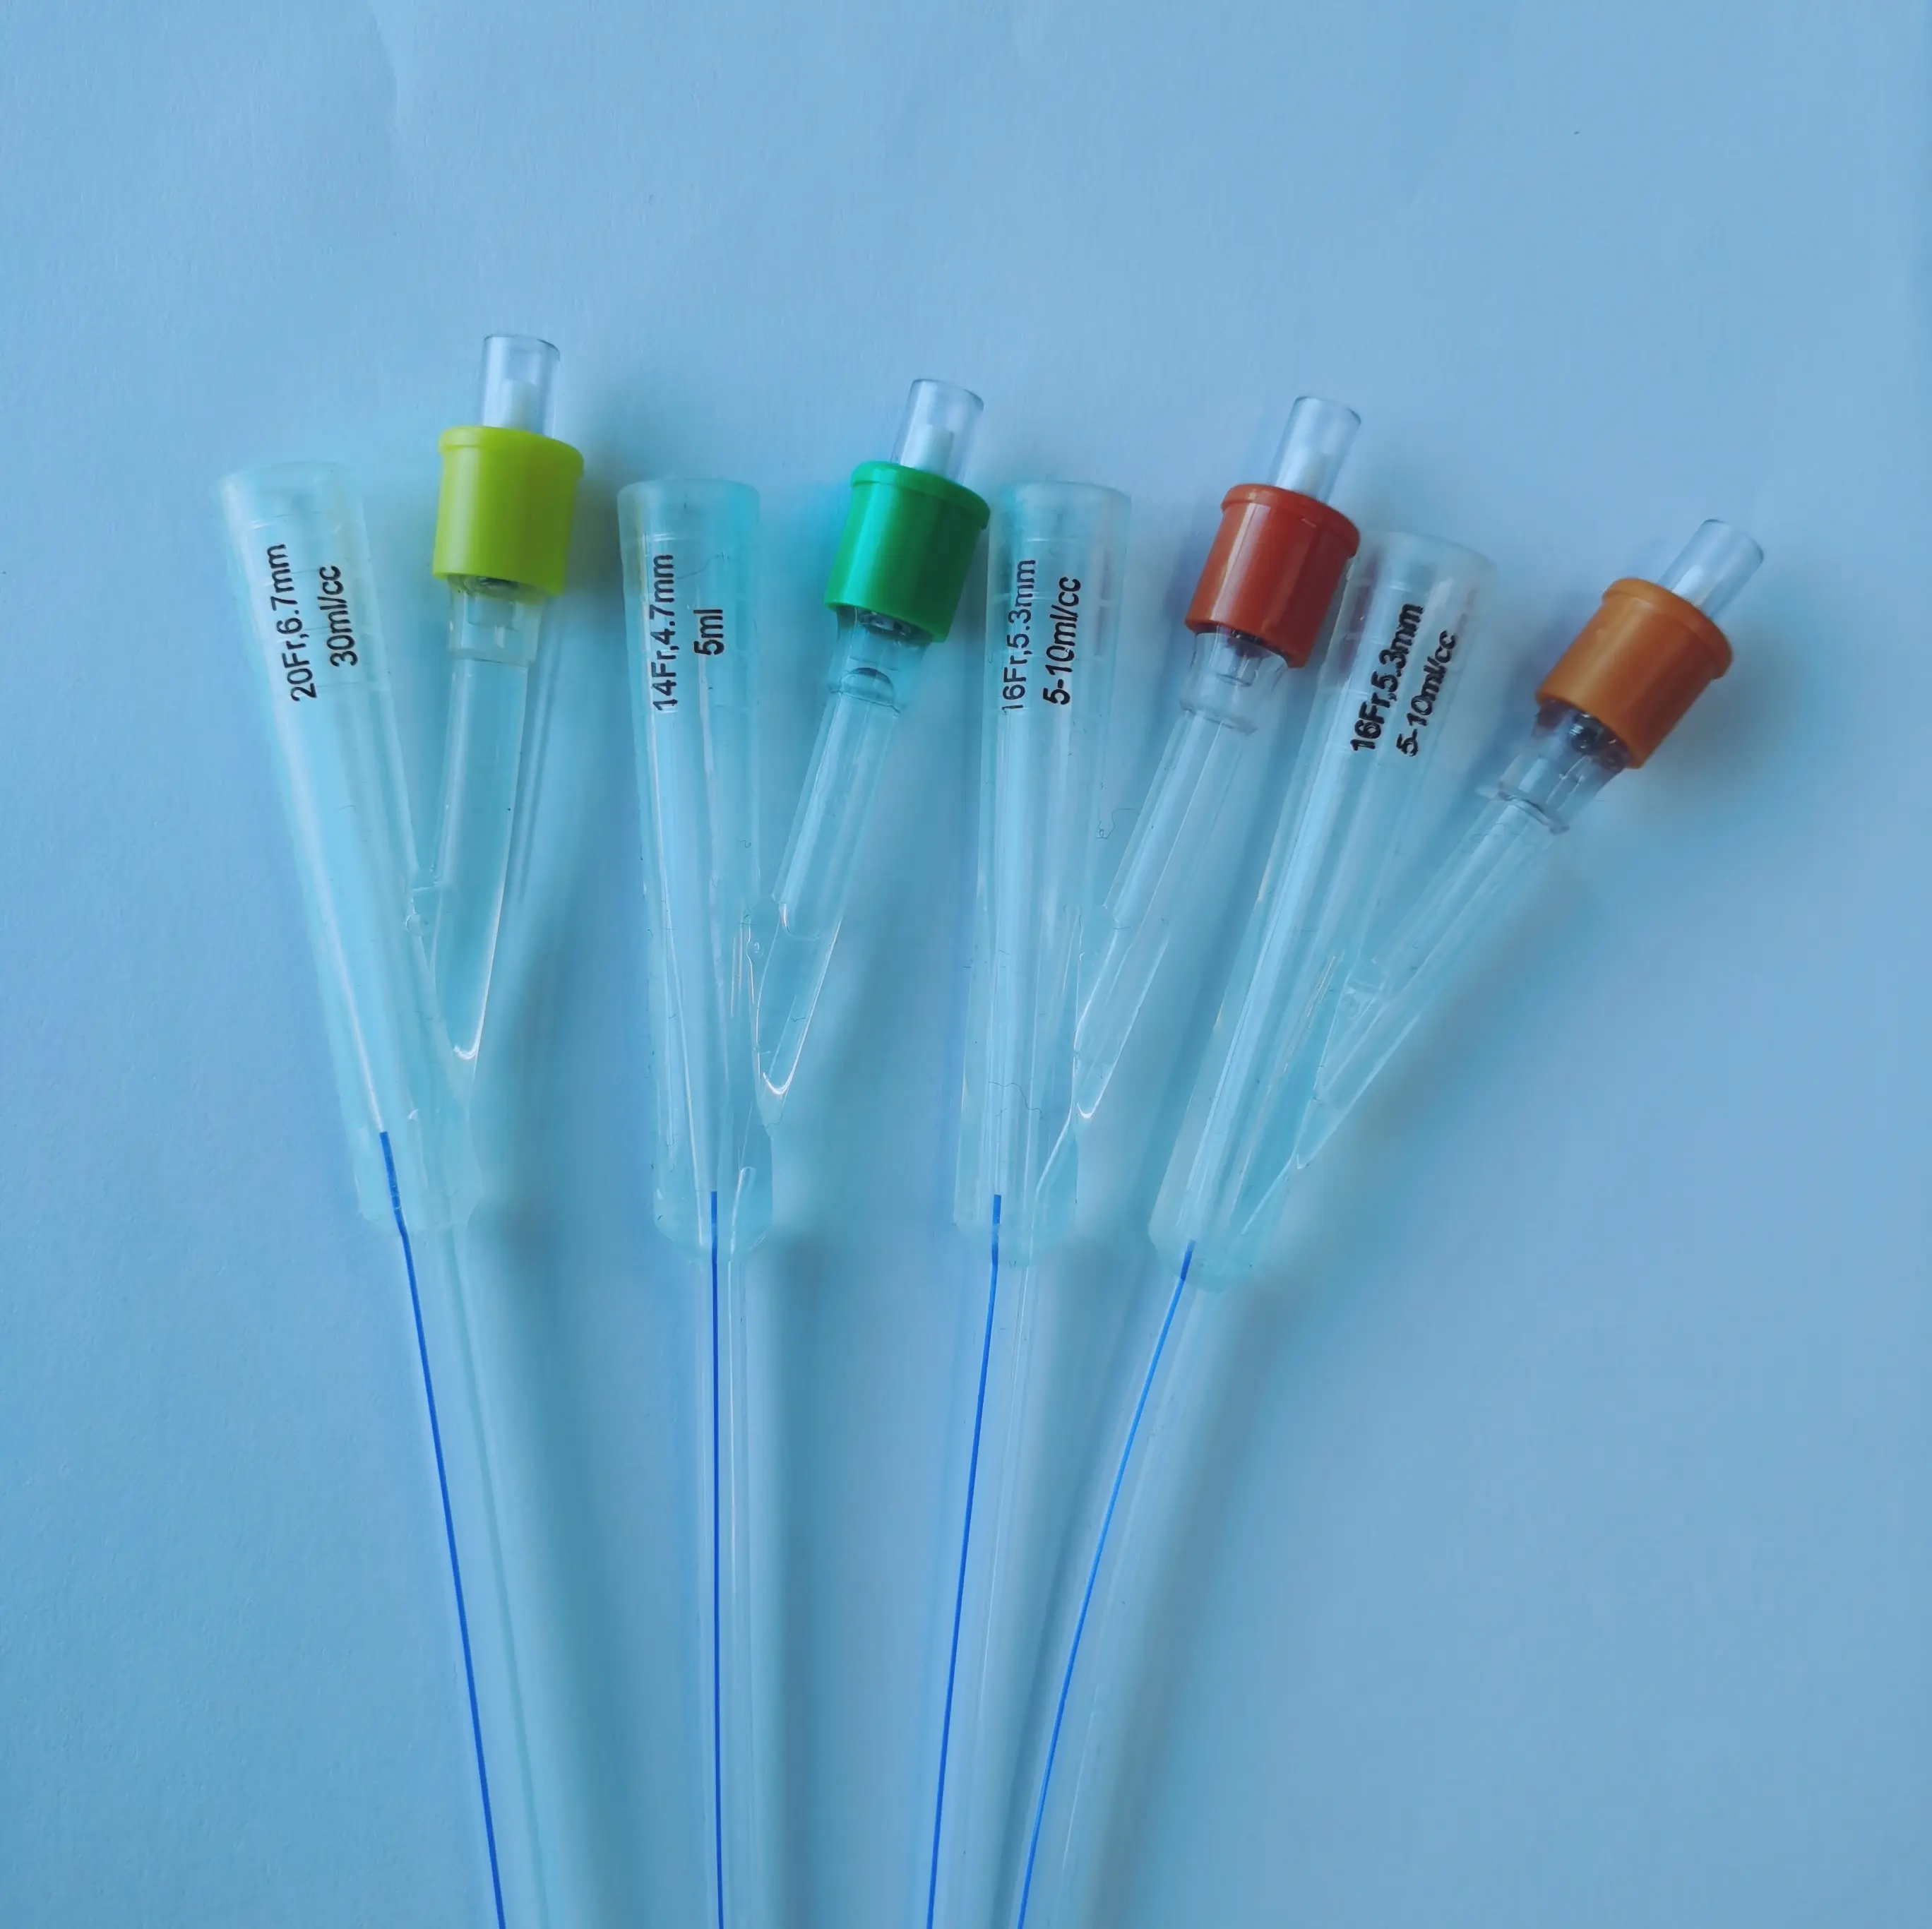 100% silicone medical catheter disposable urethral catheter child and adult